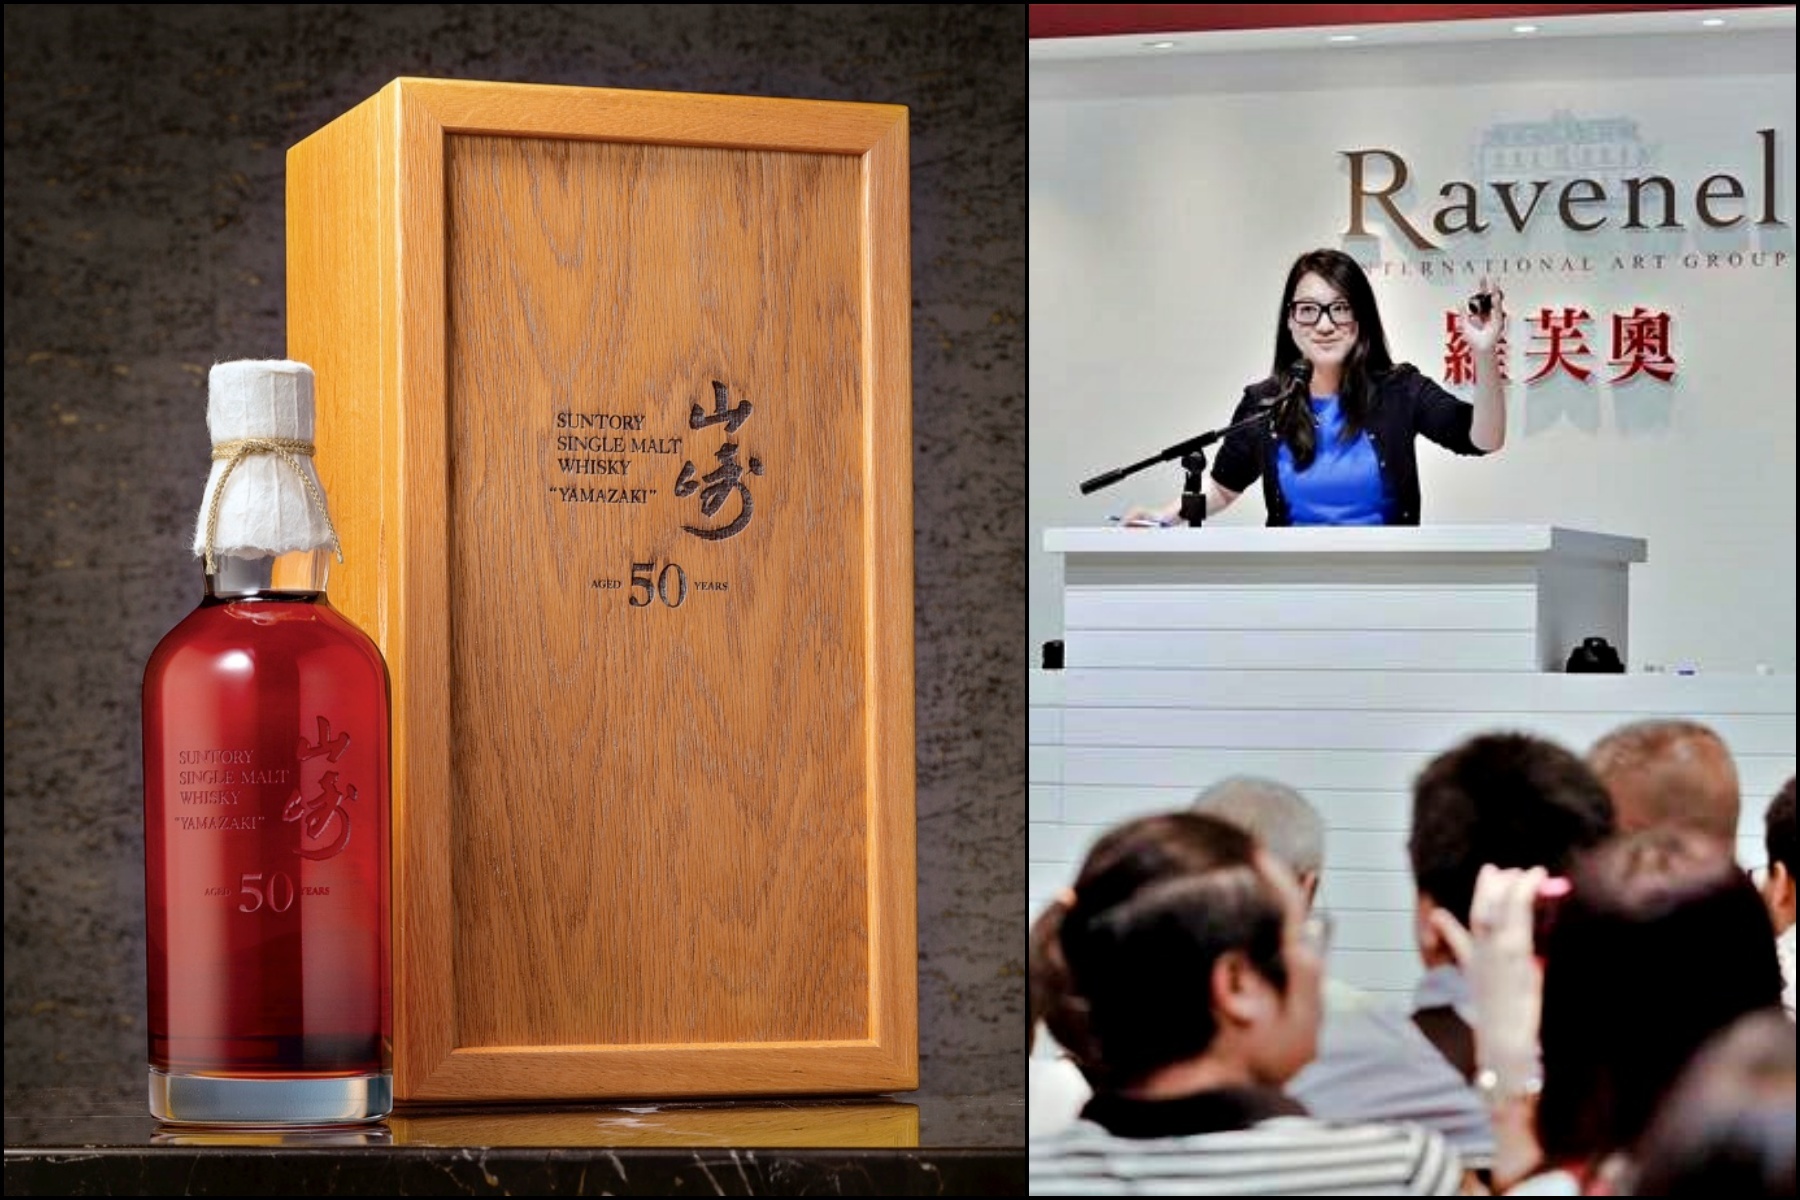 auction of investment whisky